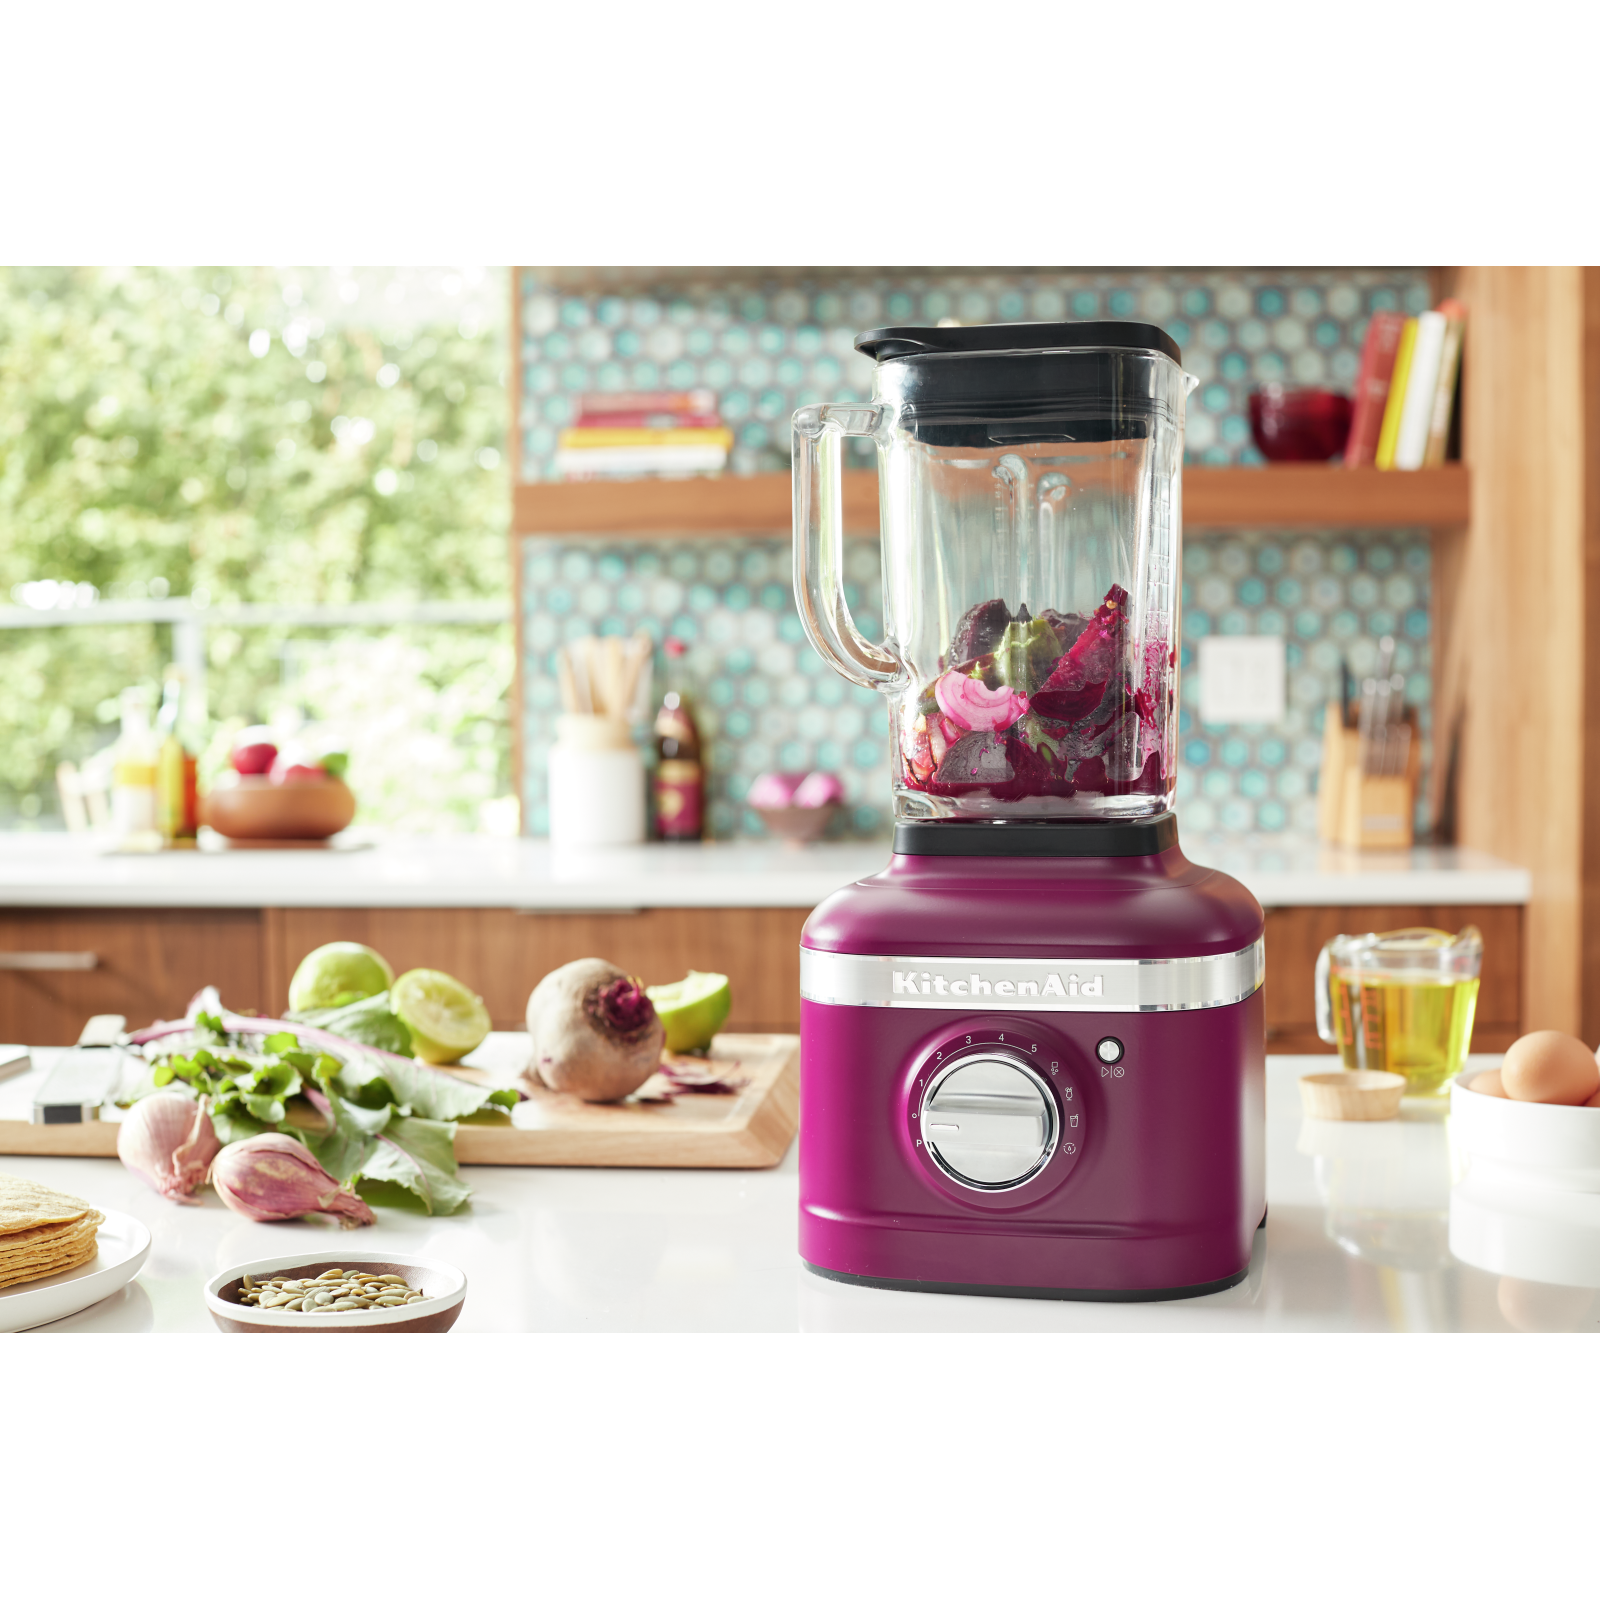 KitchenAid - 2022 Colour of the Year Beetroot K400 Blender in Purple - KSB4026BE